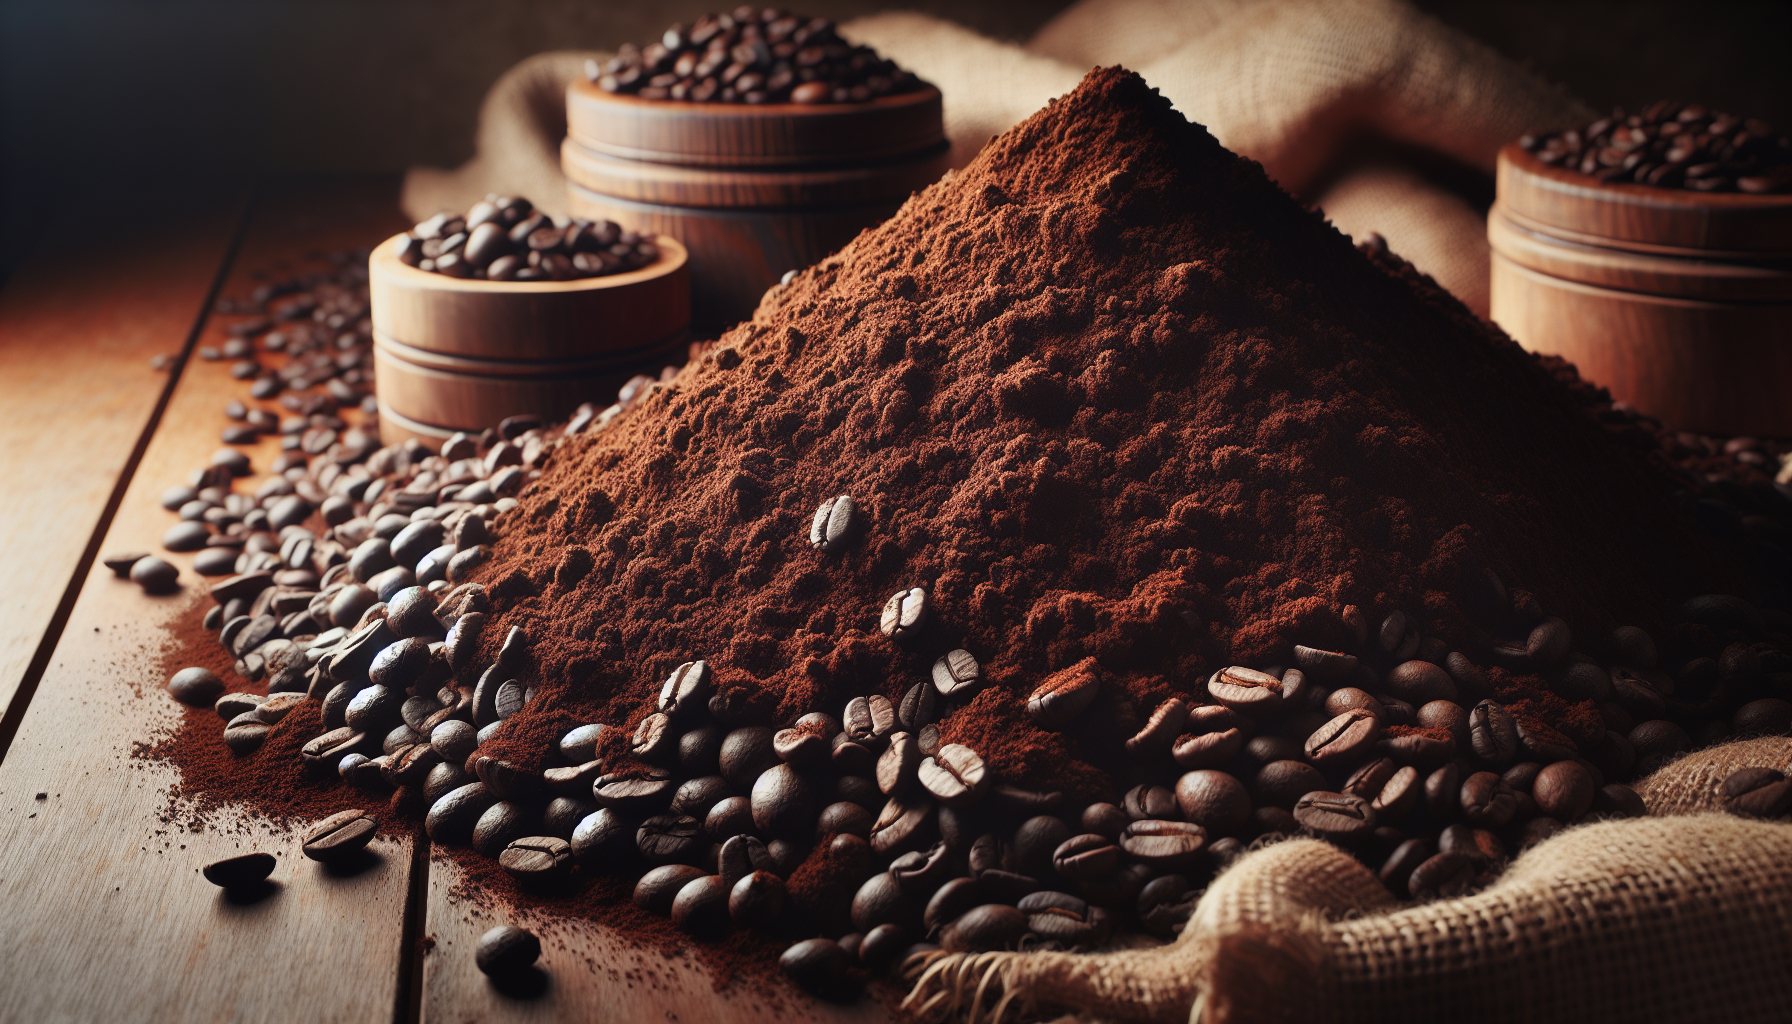 Showcase the abundance of a pile of organic ground coffee. The image should emphasize the deep texture, color, and richness of the coffee pile. The coffee is arranged in such a natural way as if it wa